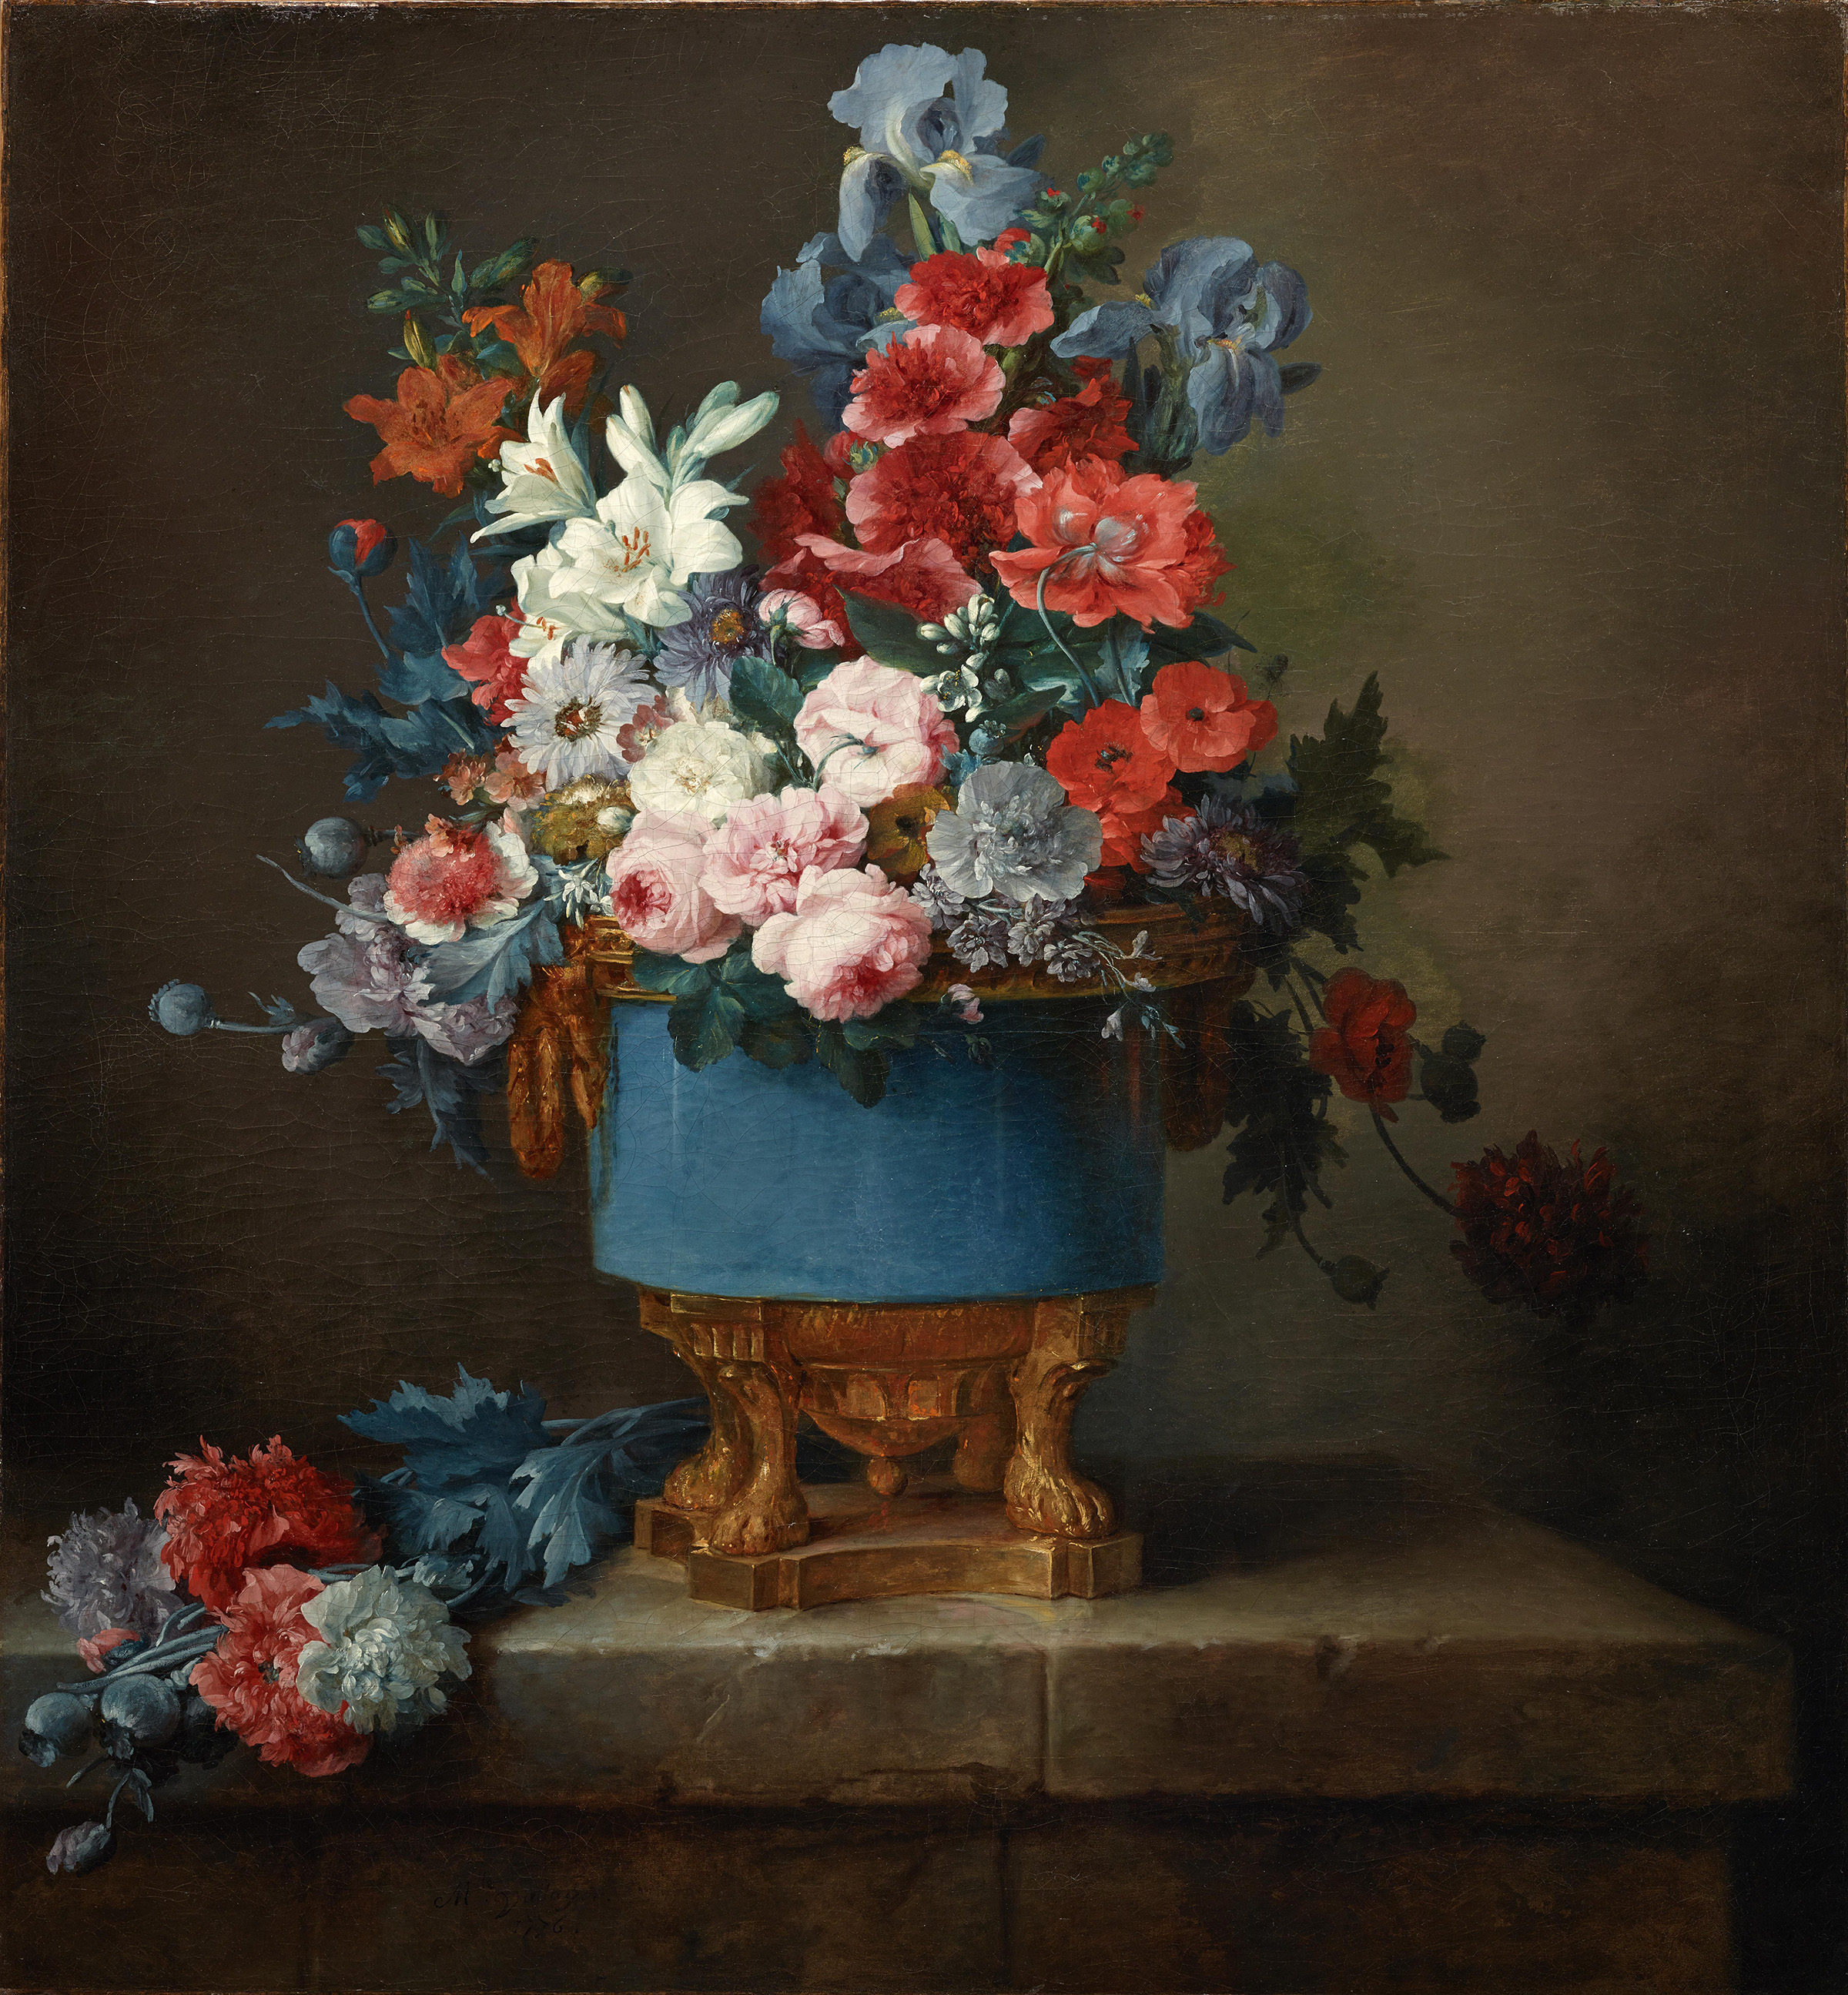 Bouquet of Flowers in a Blue Porcelain Vase by Anne Vallayer-Coster - 1776 - 122.24 × 113.35 cm Dallas Museum of Art